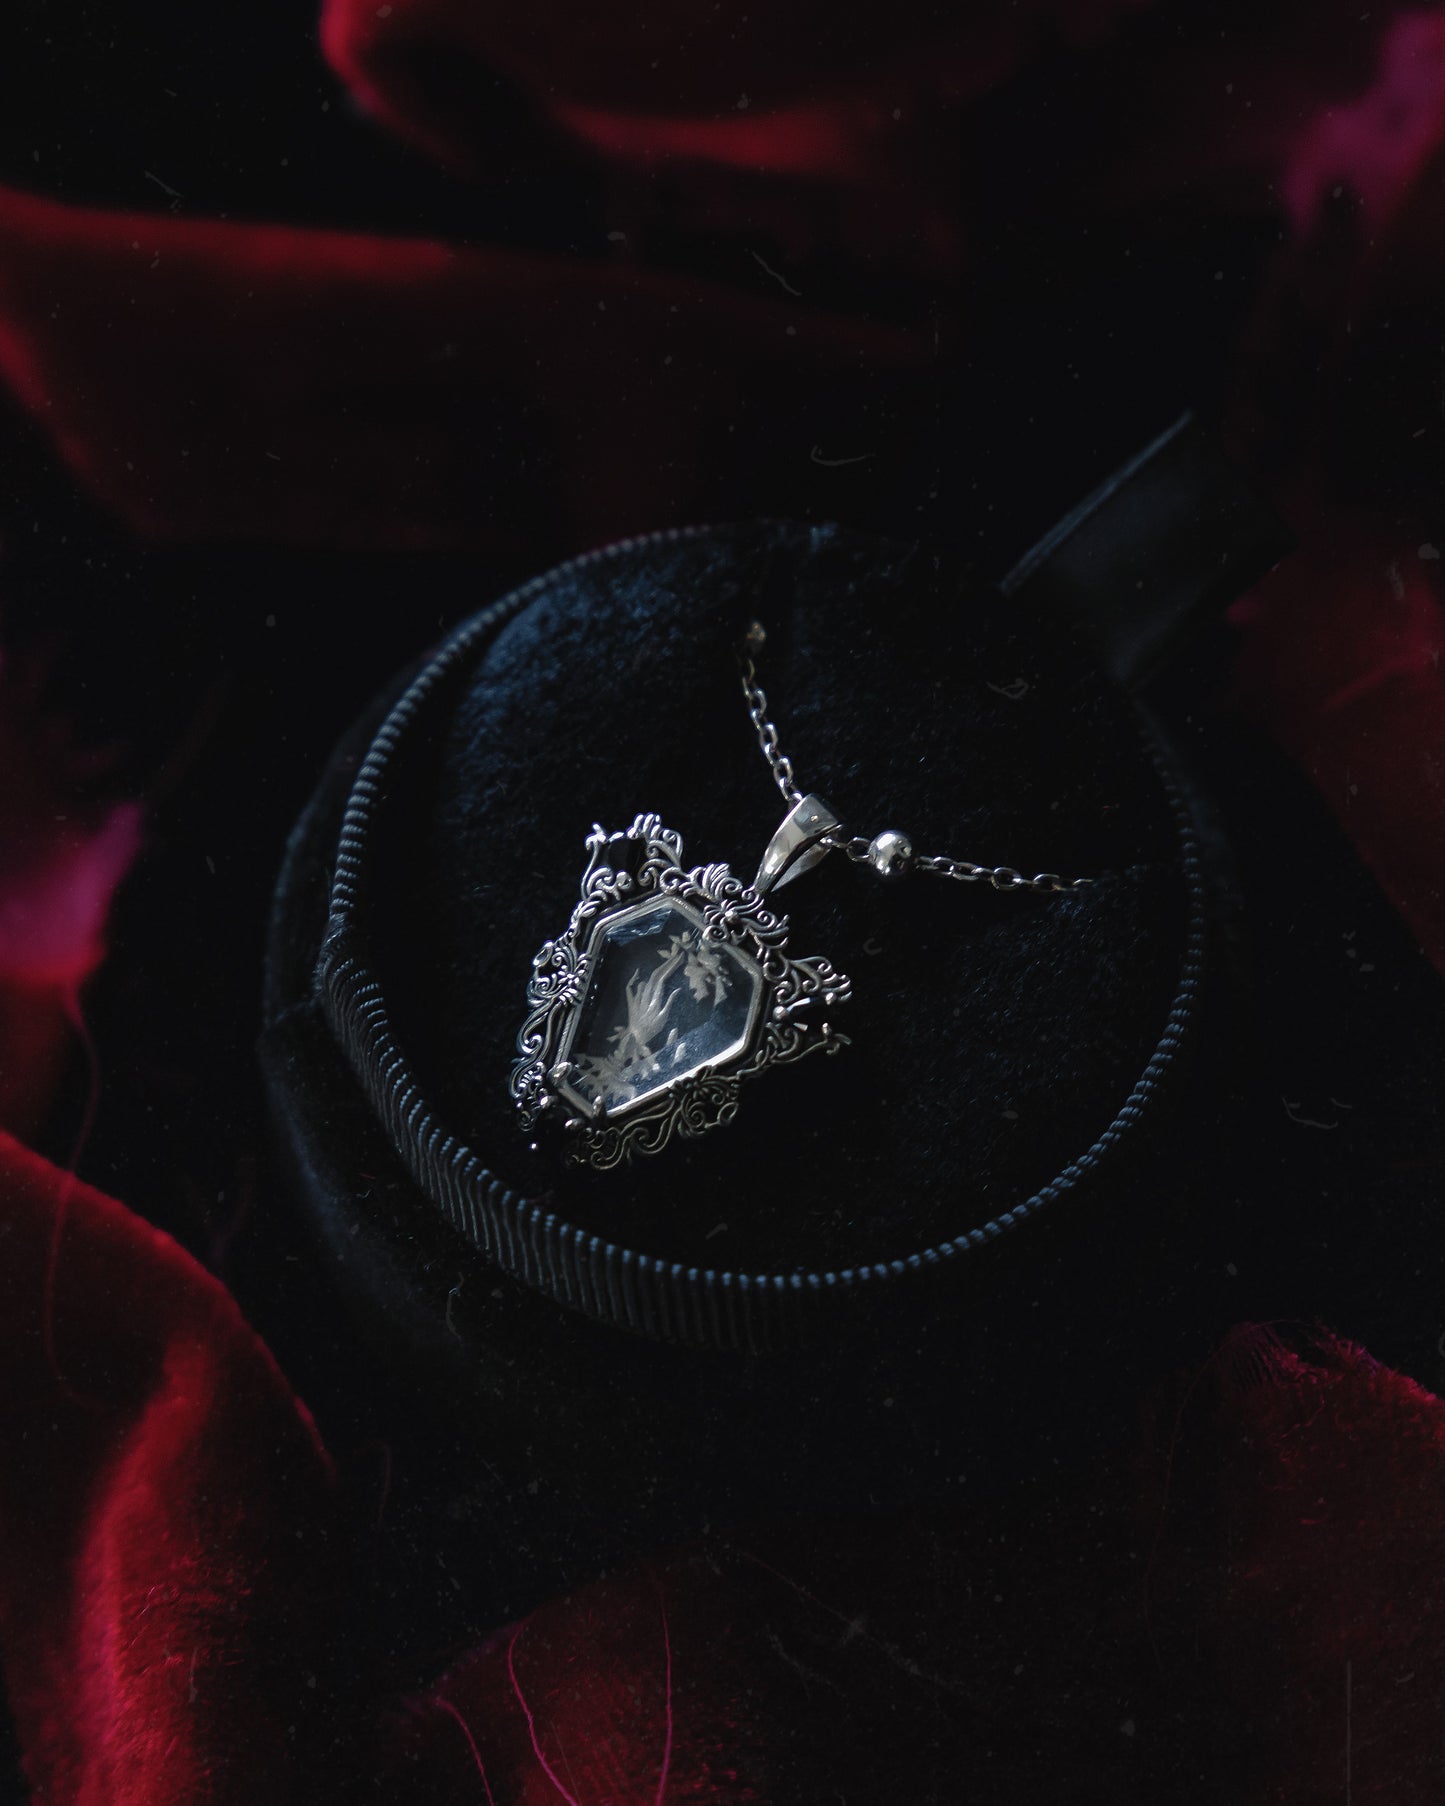 The Glass Casket "Mourning Hand" Necklace